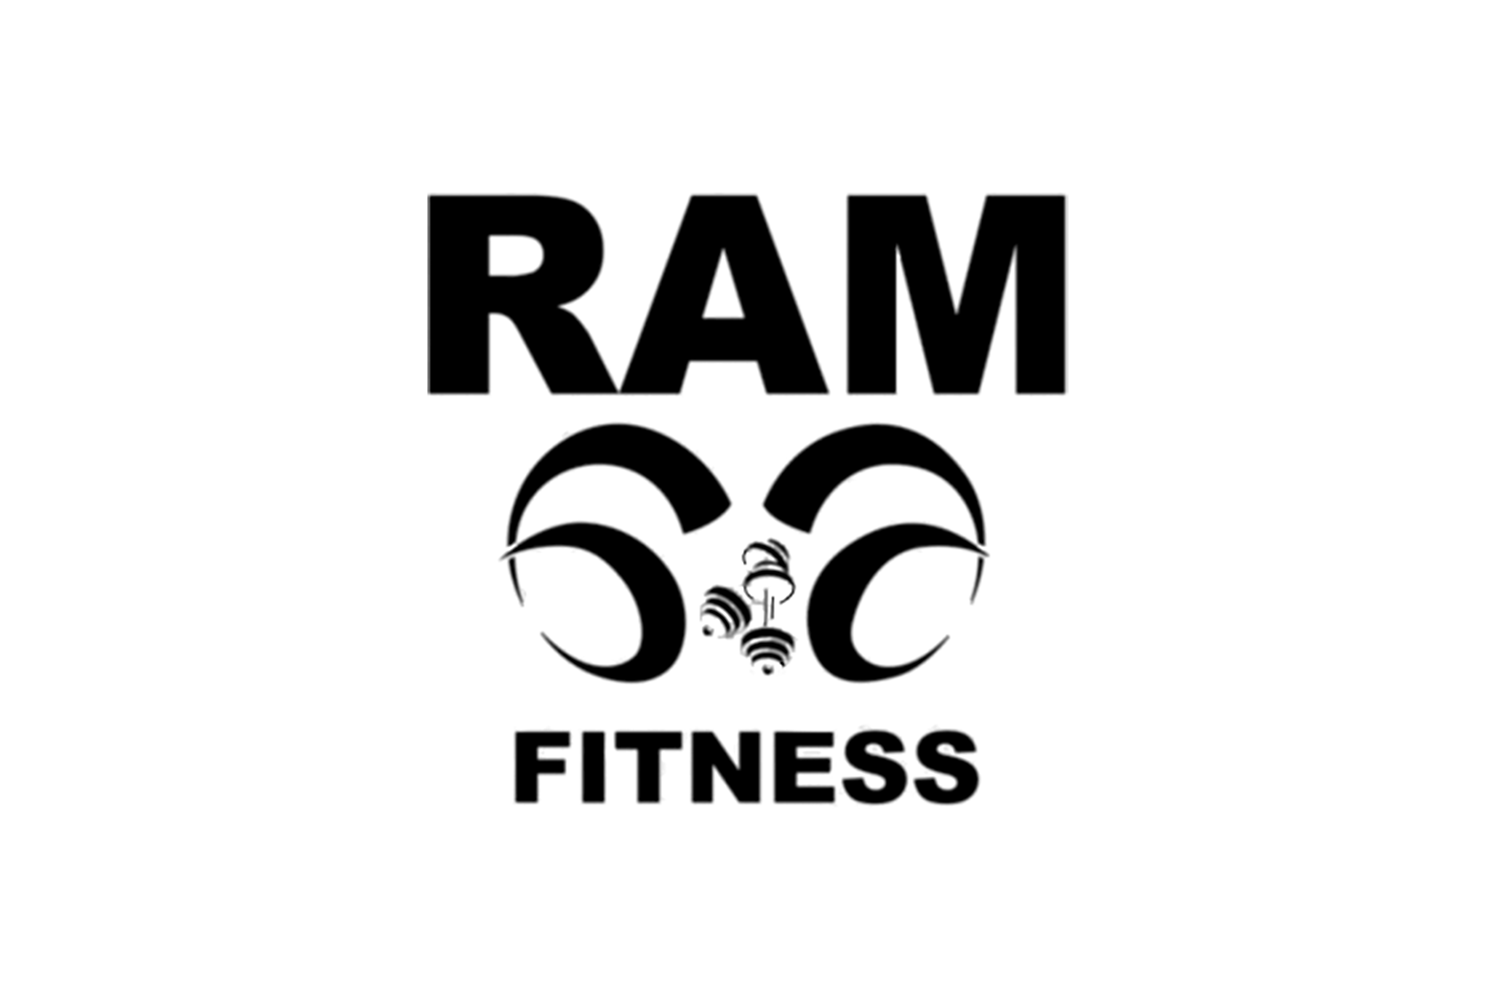 The official logo of Ram Fitness and Gym in East Liverpool, Ohio.